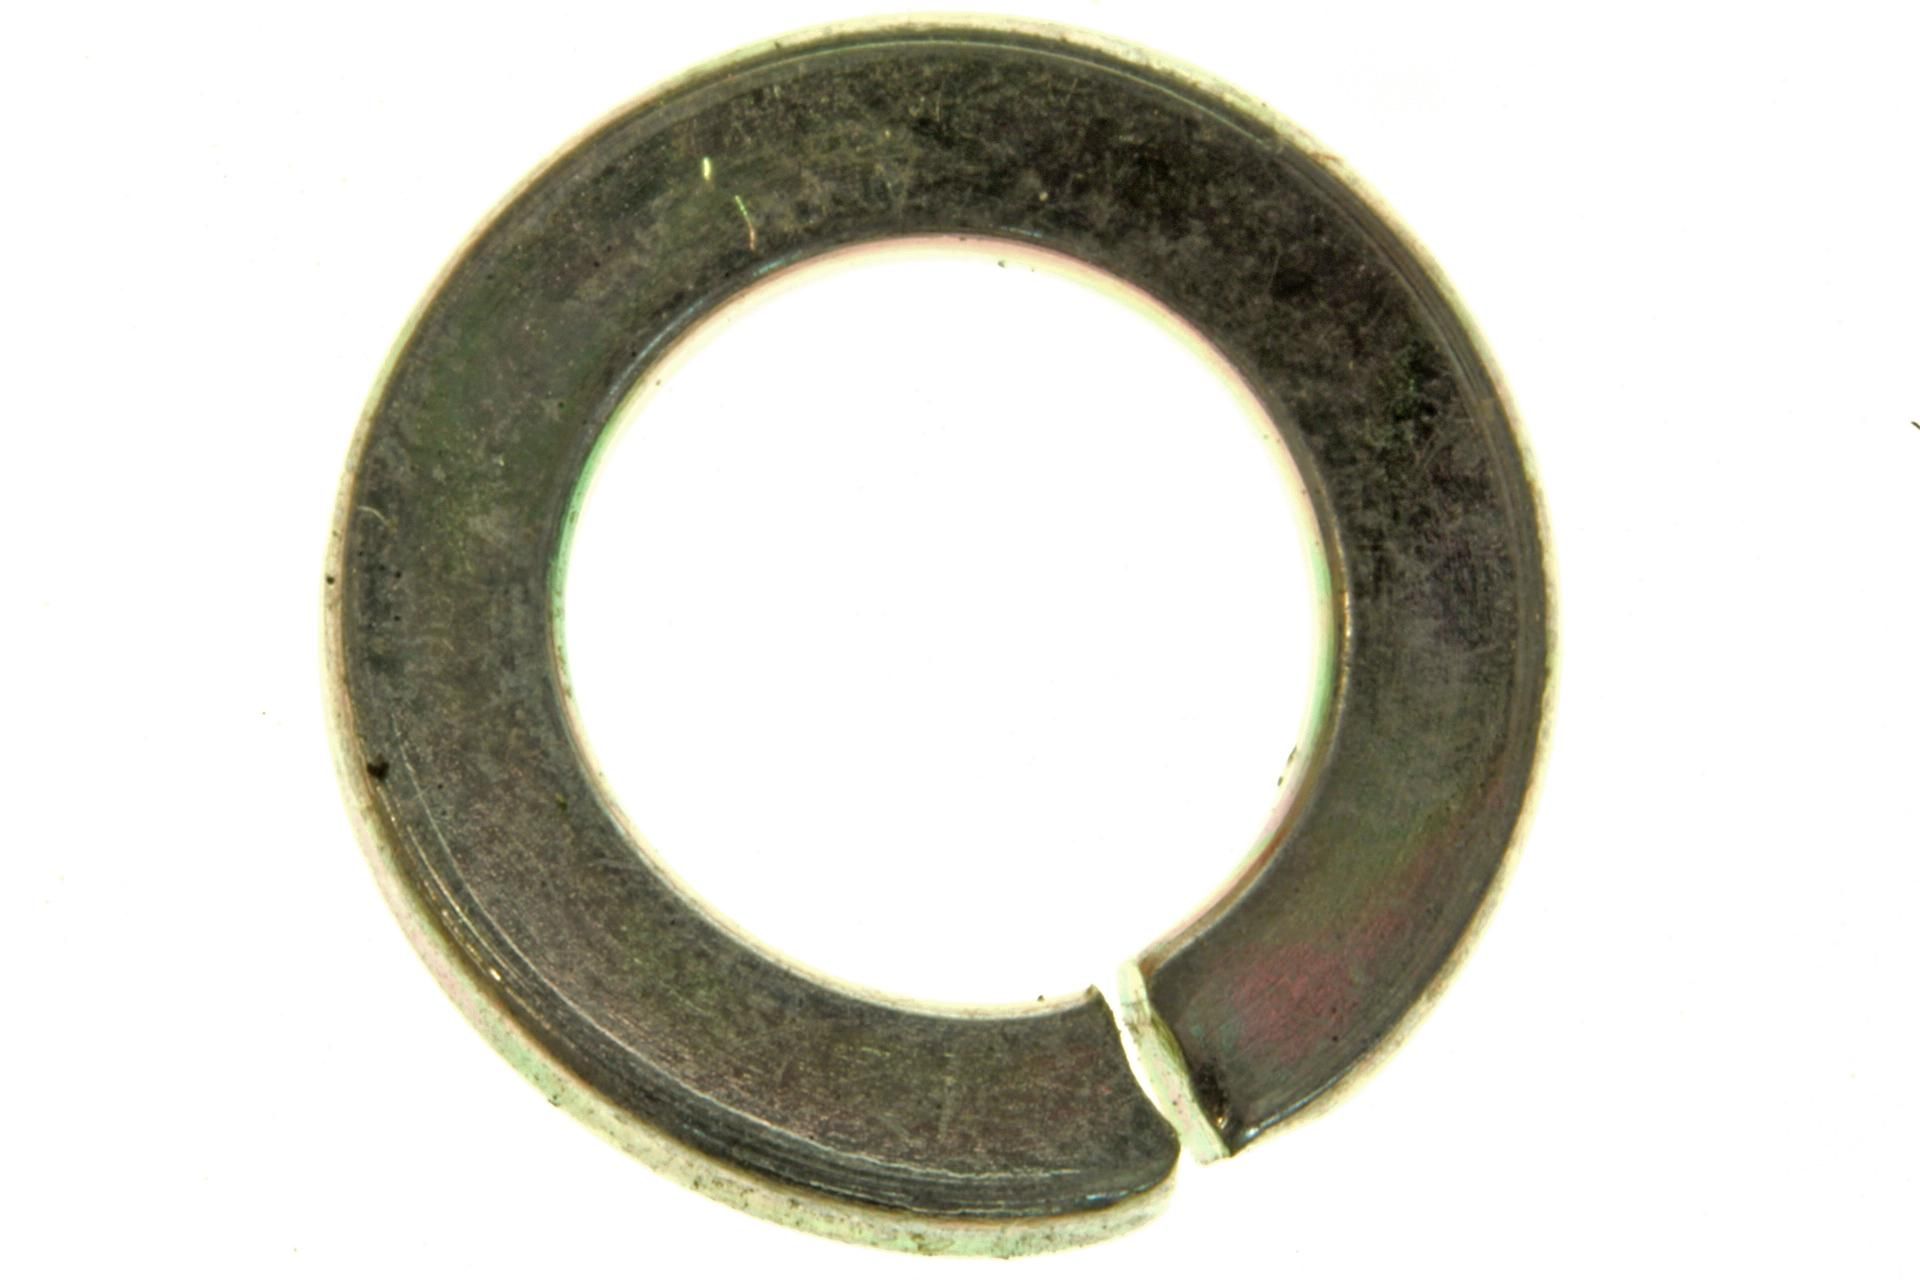 08321-01057 Superseded by 08321-0105A - WASHER,LOCK